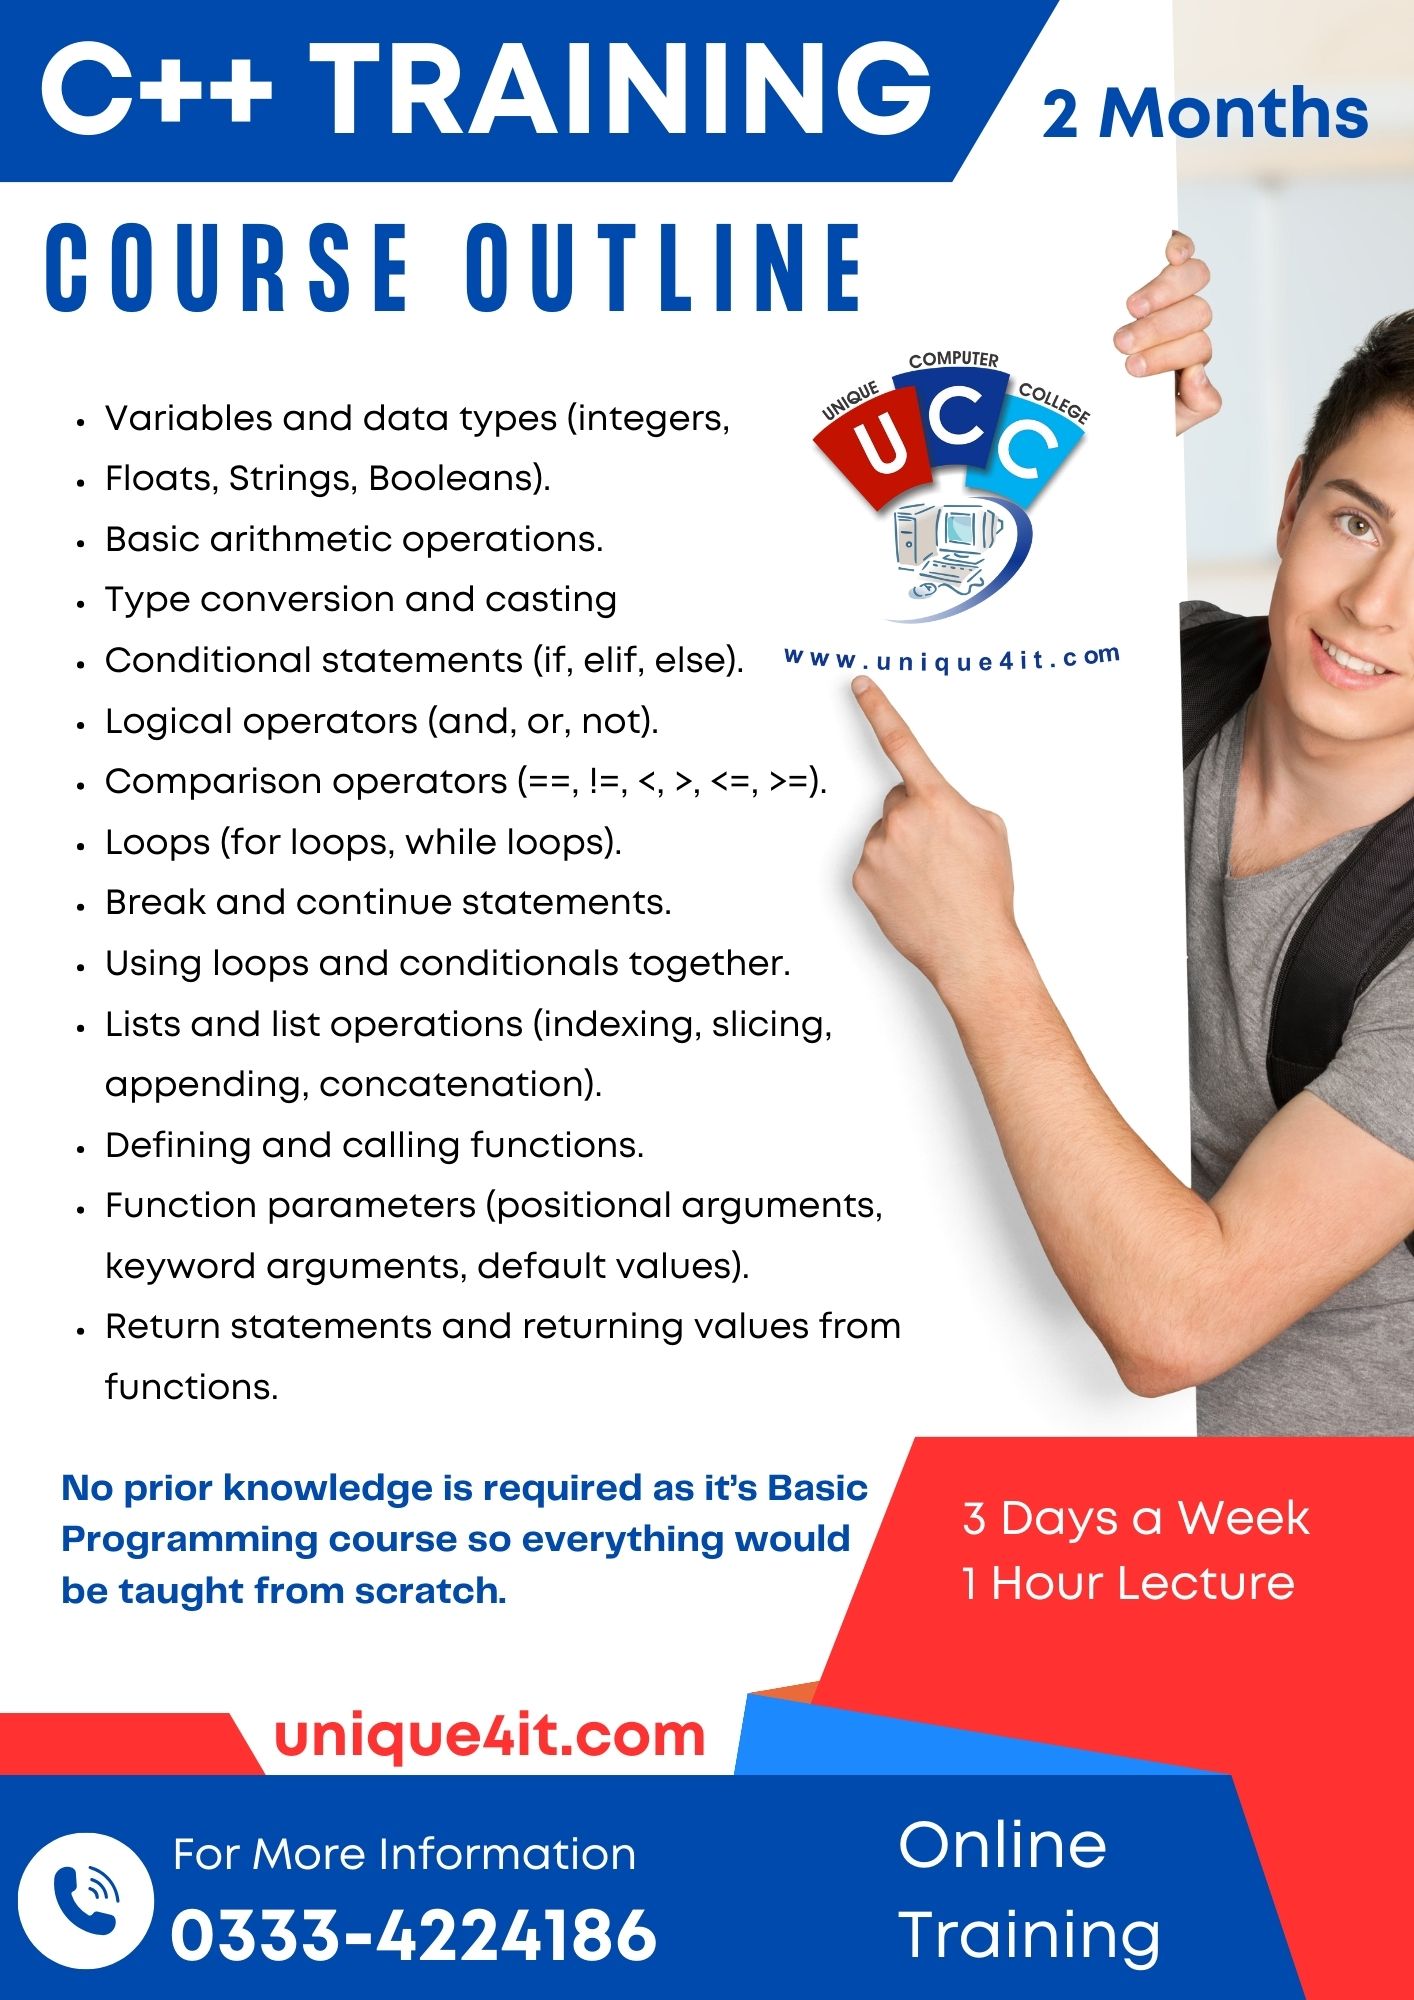 basic programming course in lahore, c++ course in lahore , c++ training in lahore